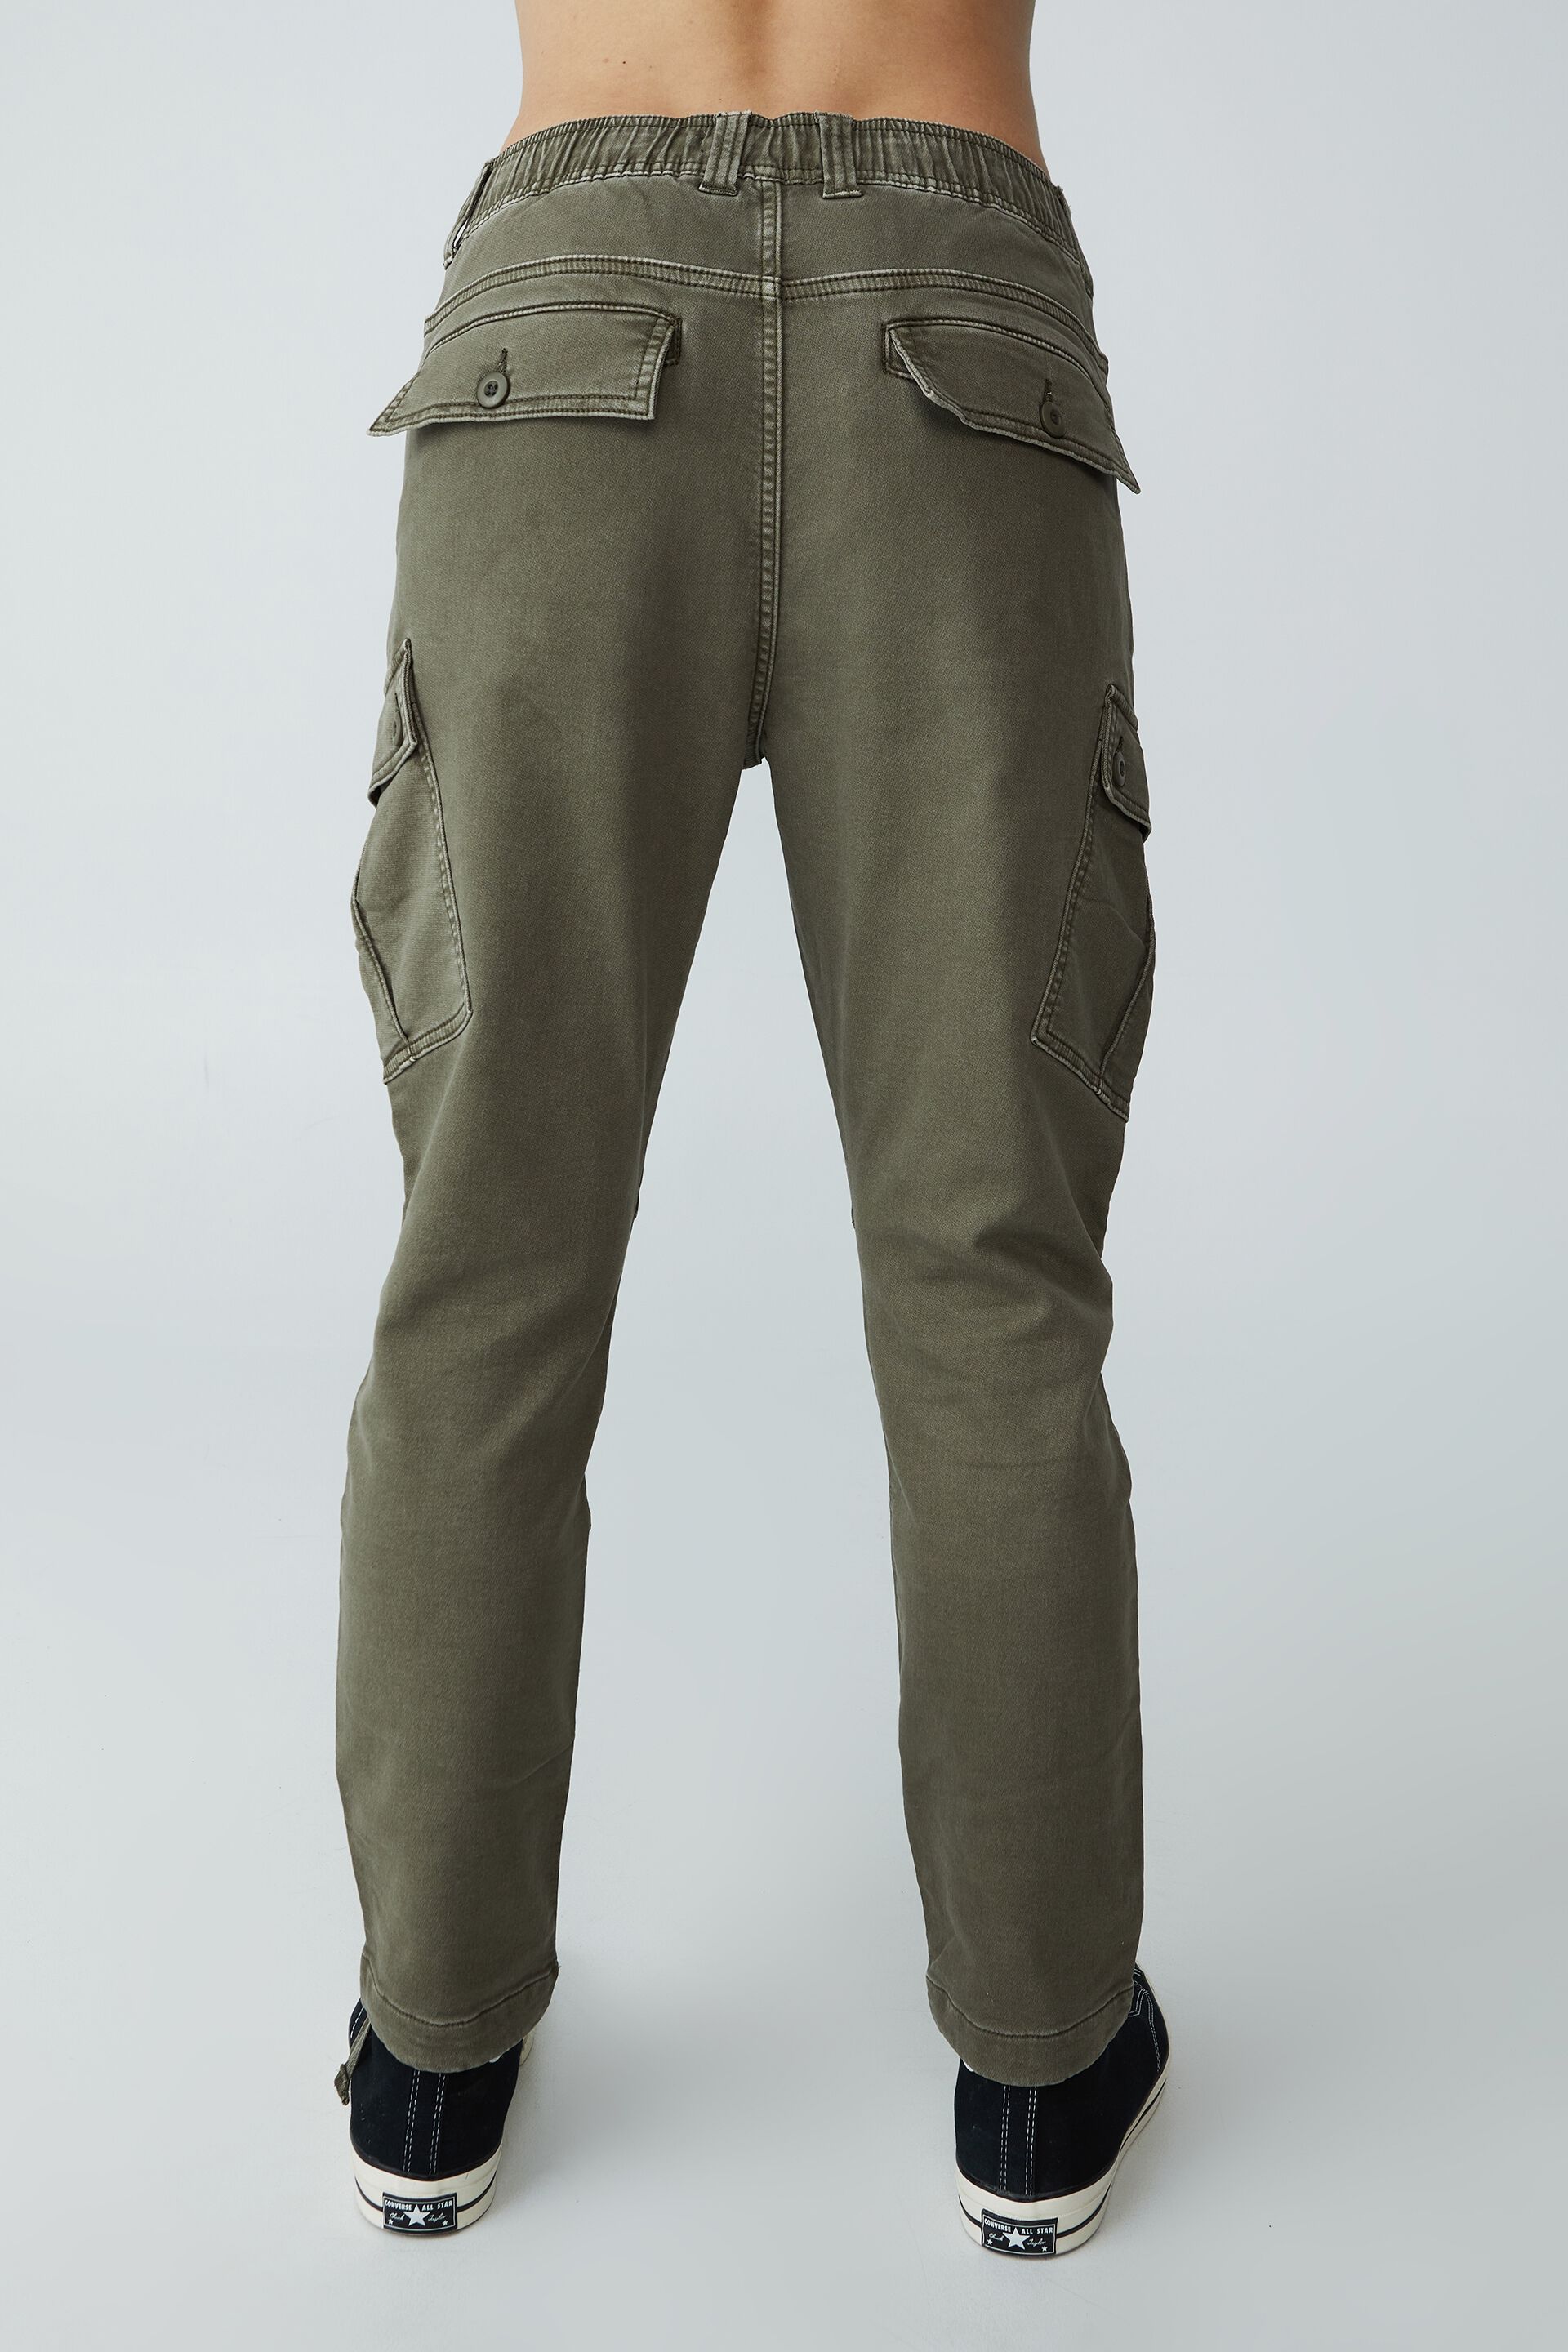 Buy The Power For The People Gene Cargo Pant Online at UNION LOS ANGELES